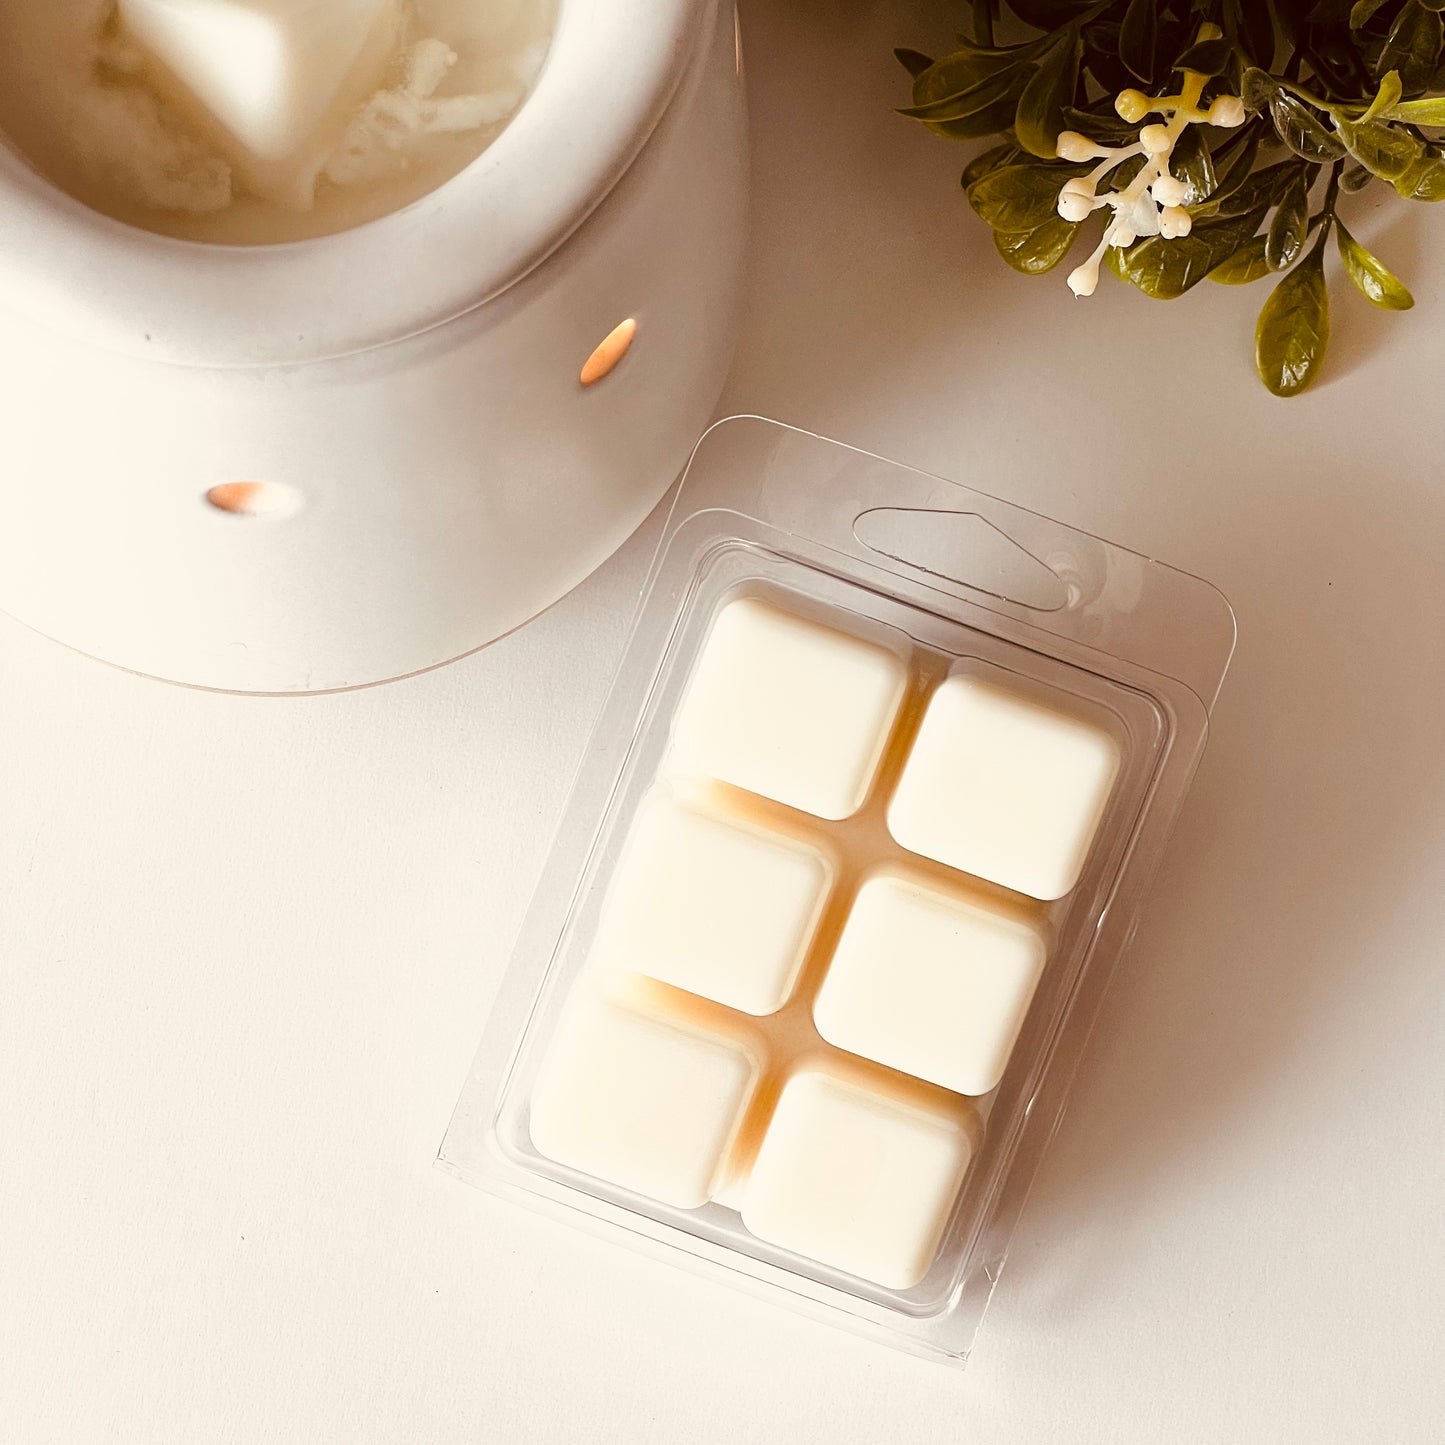 ALL THE COFFEE - 2.5 oz Soy Wax Melts